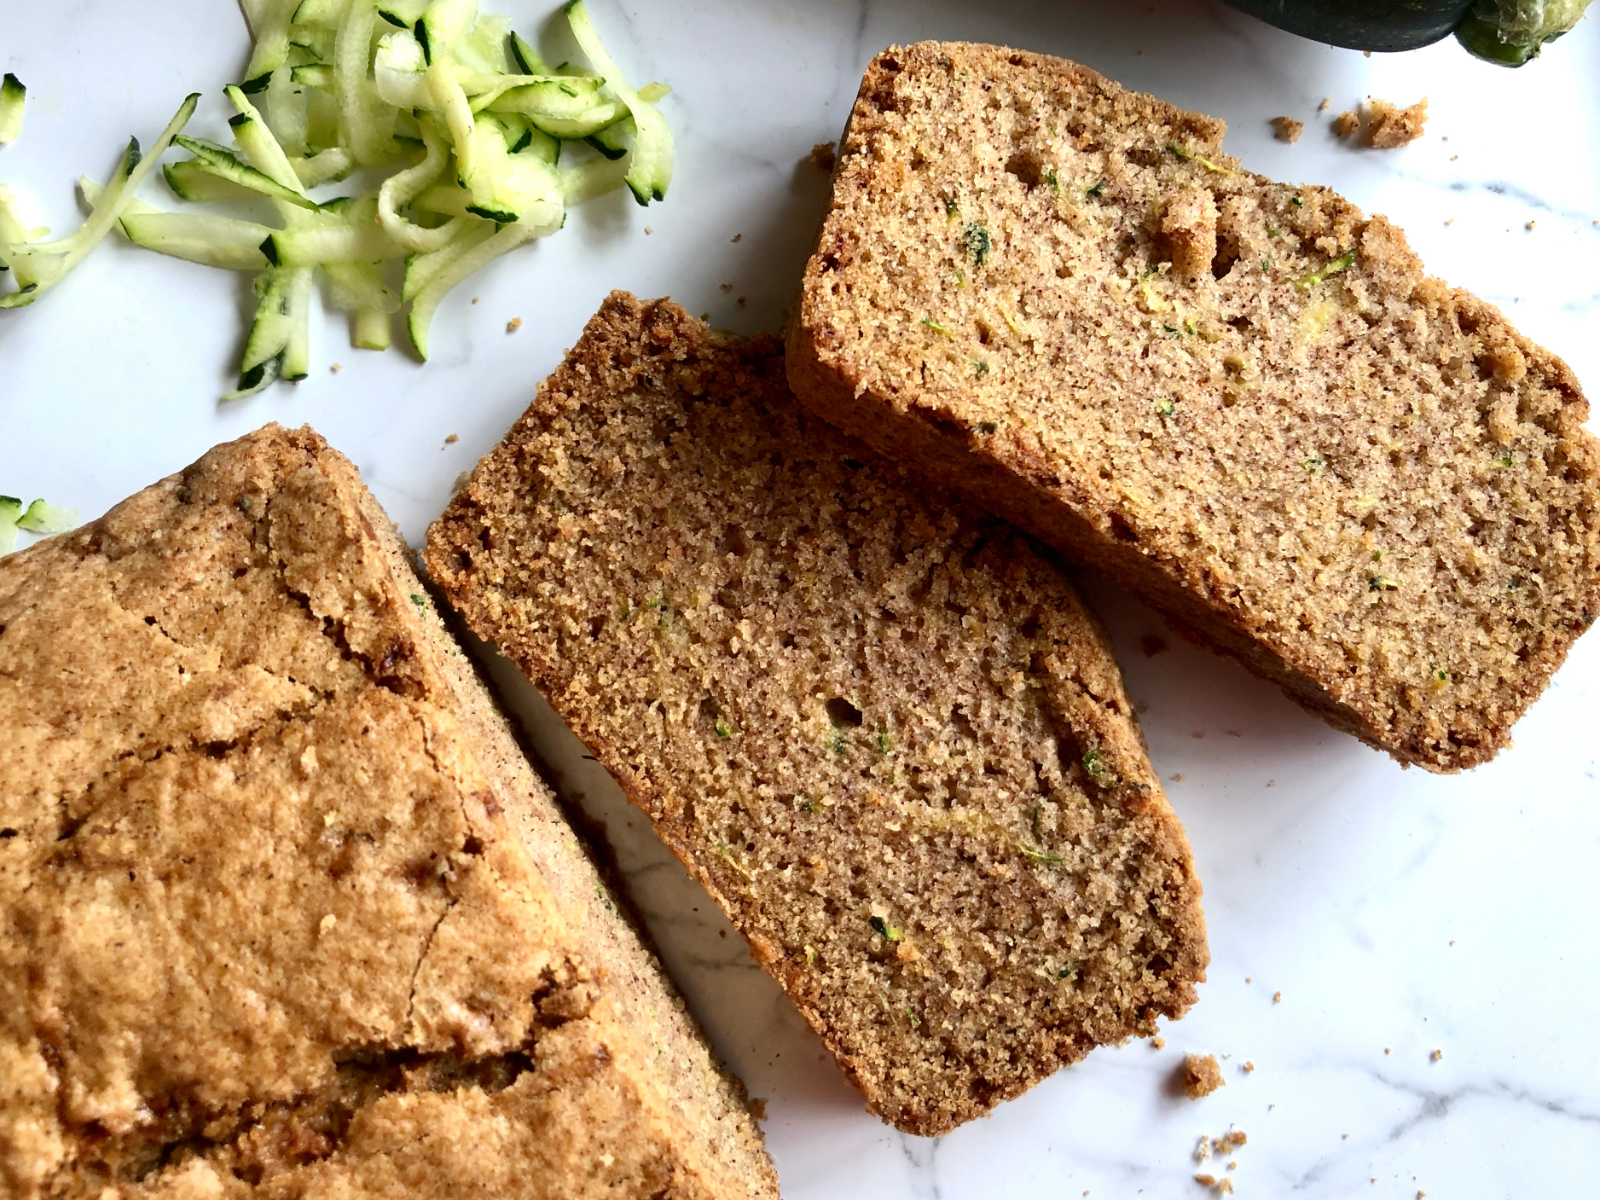 slices of a healthy zucchini bread on a counter